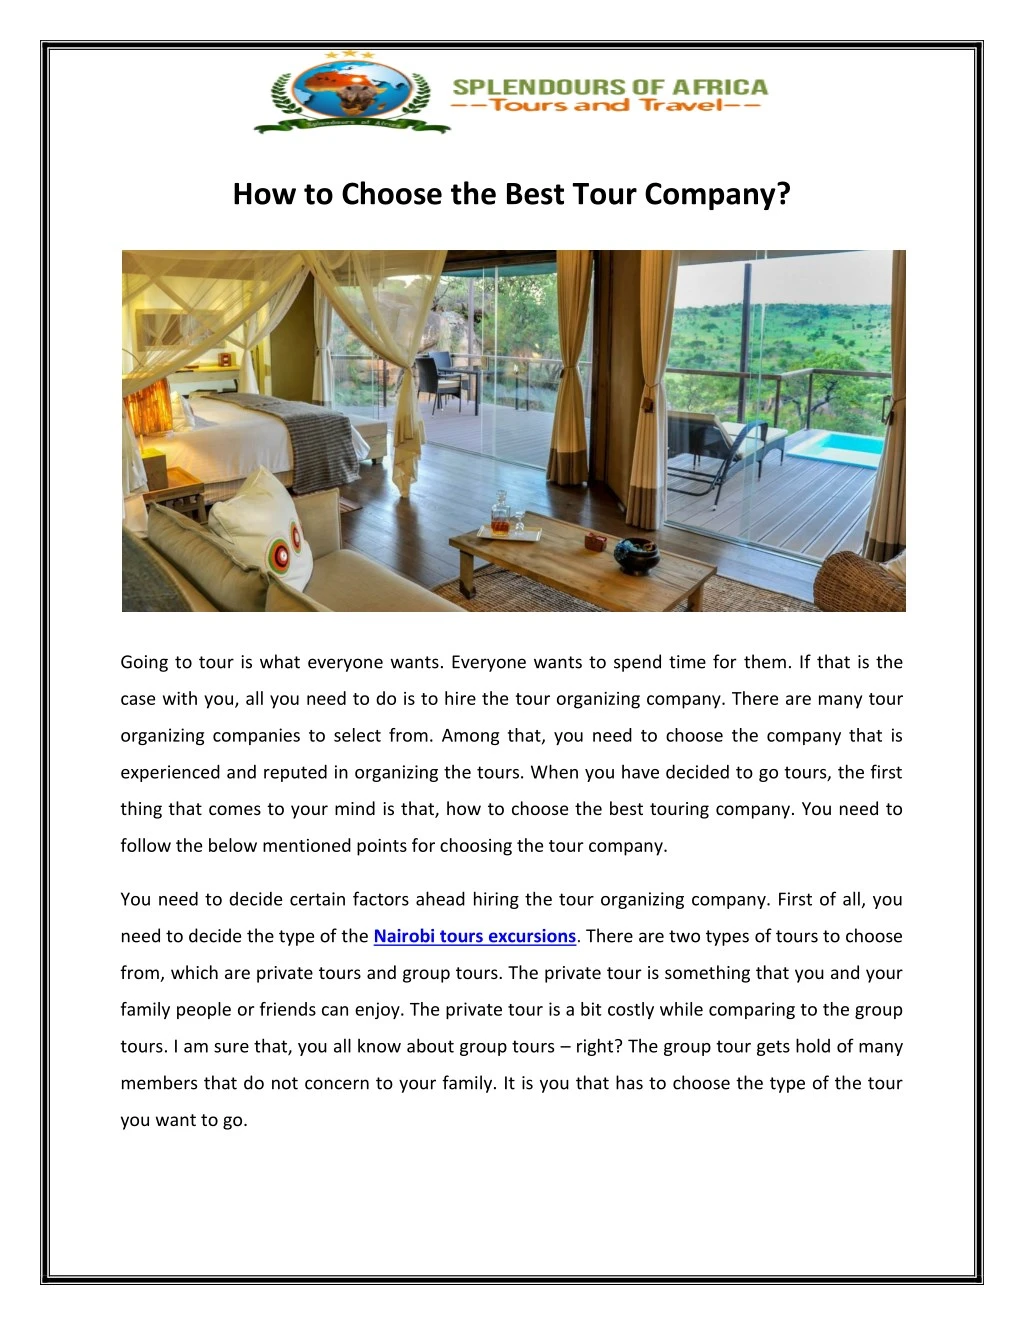 how to choose the best tour company